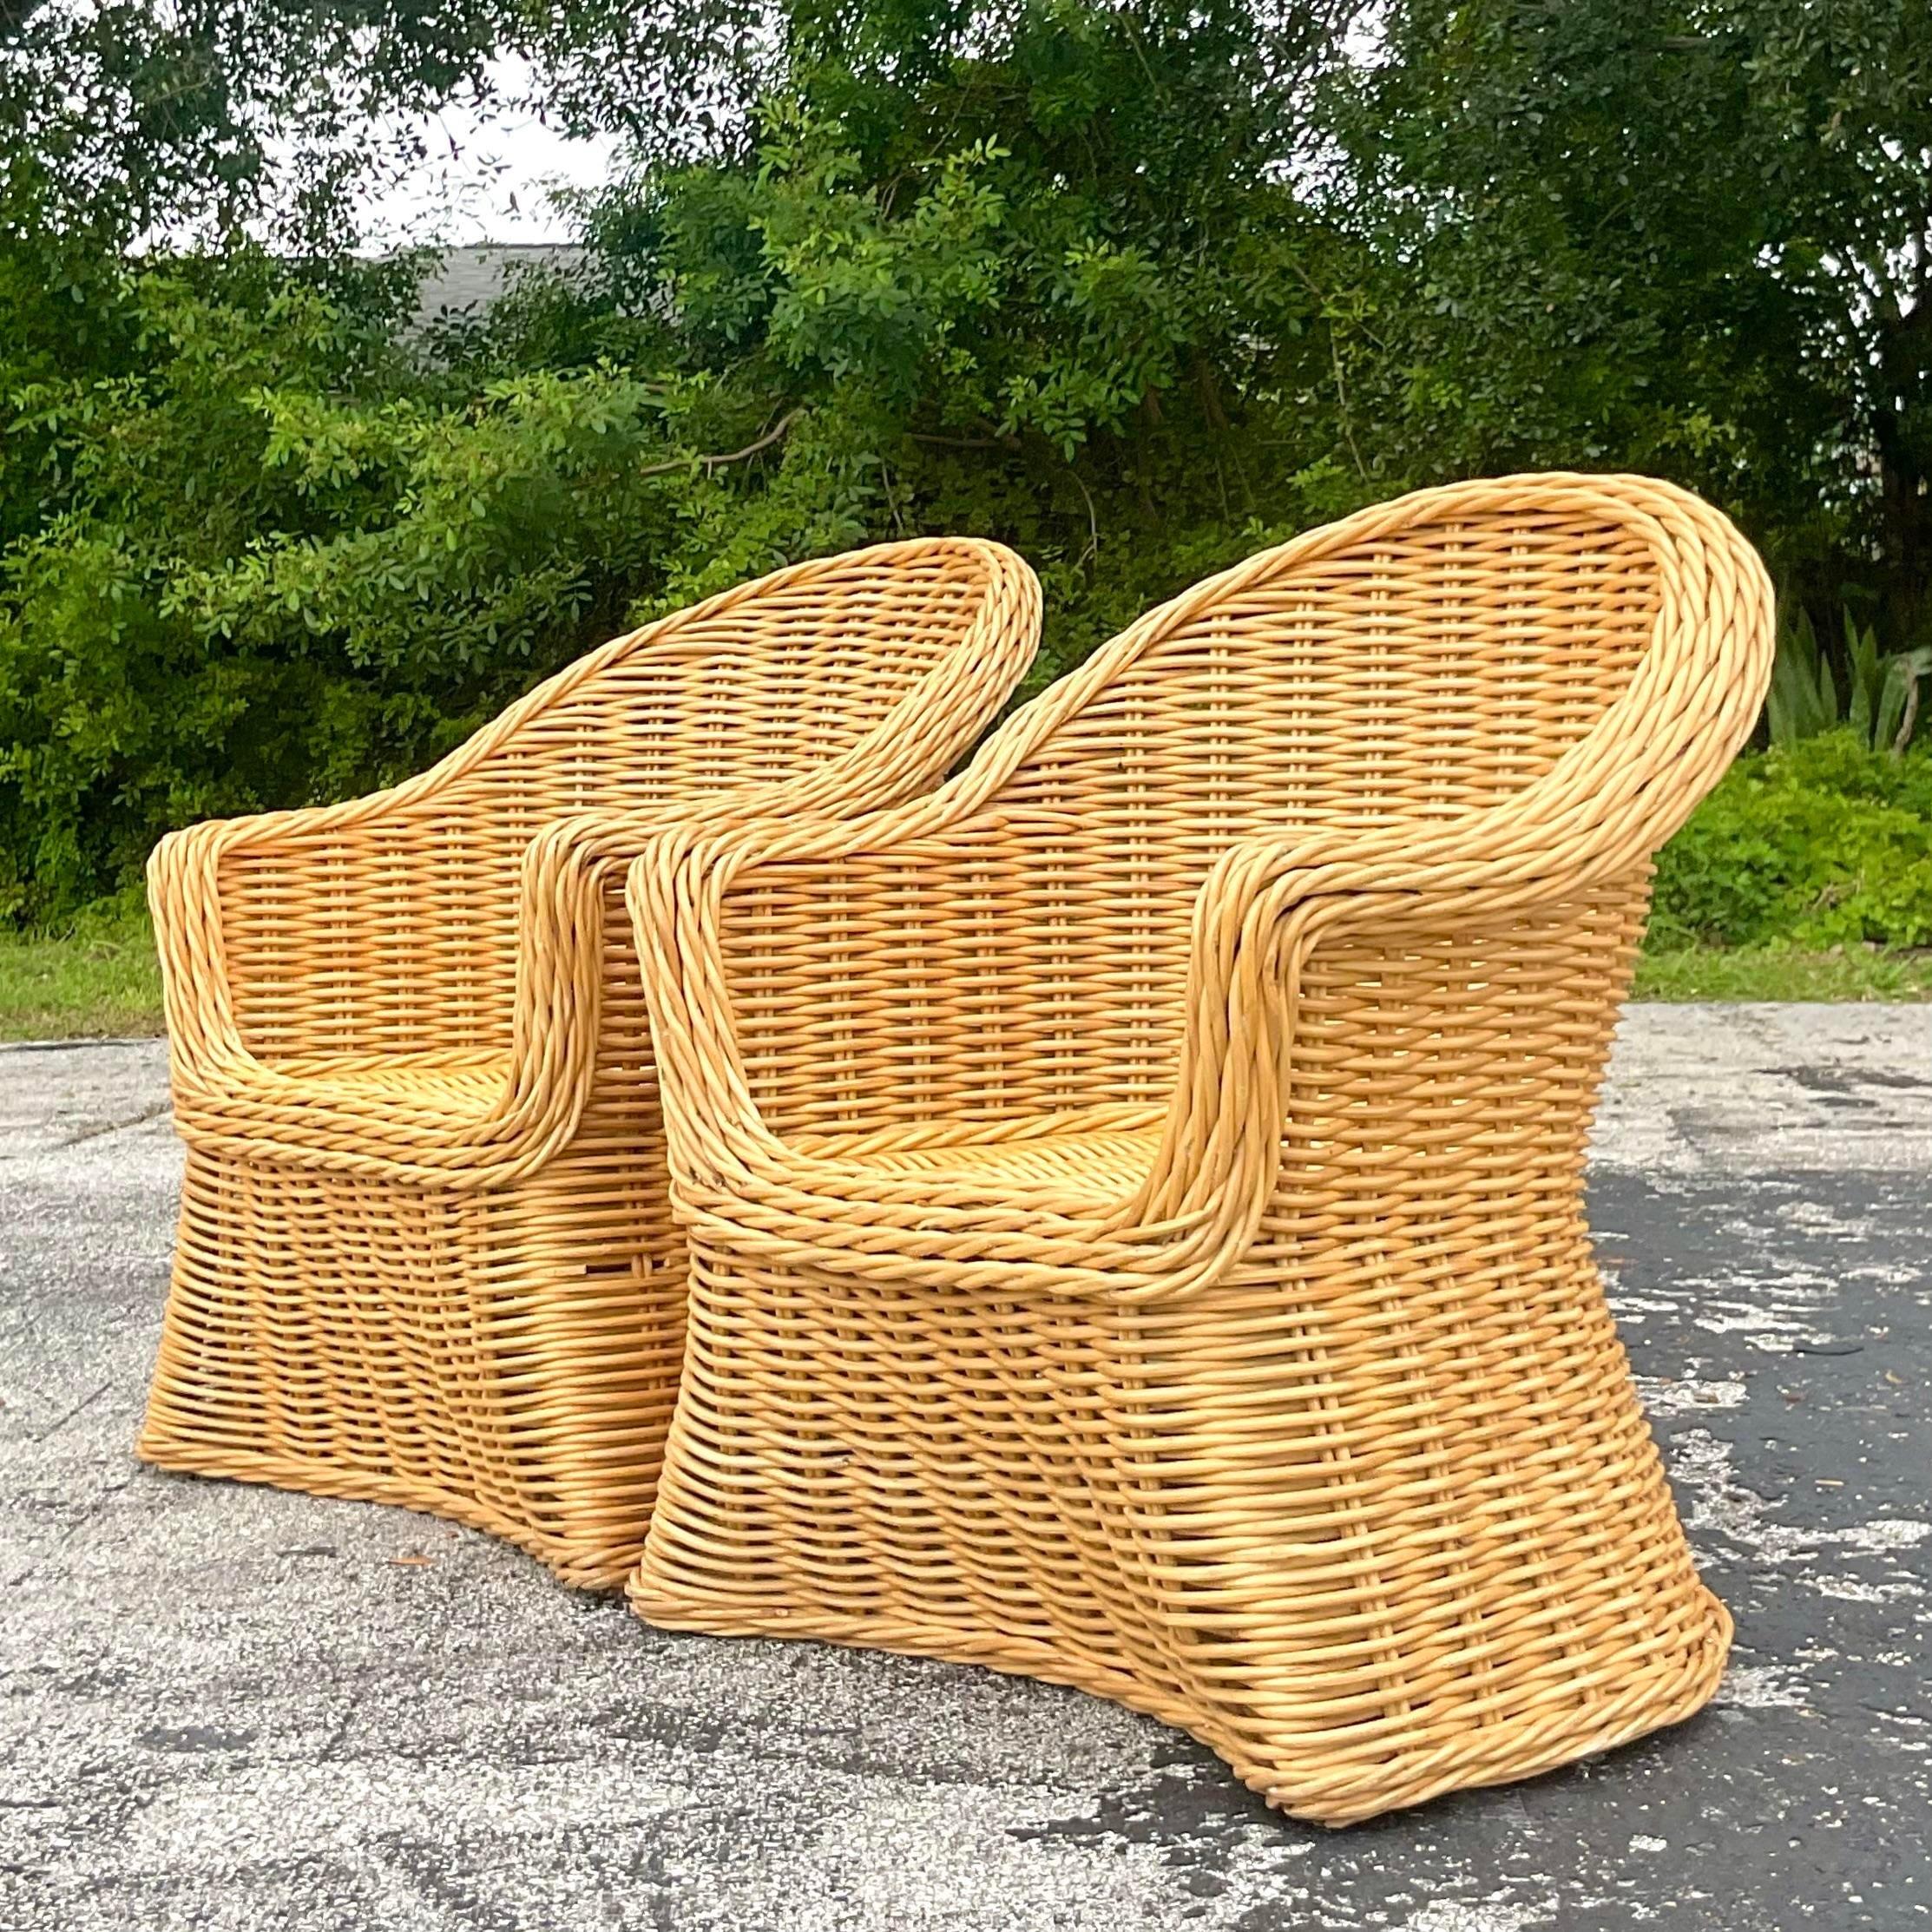 Philippine Vintage Coastal Woven Rattan Arm Chairs - a Pair For Sale